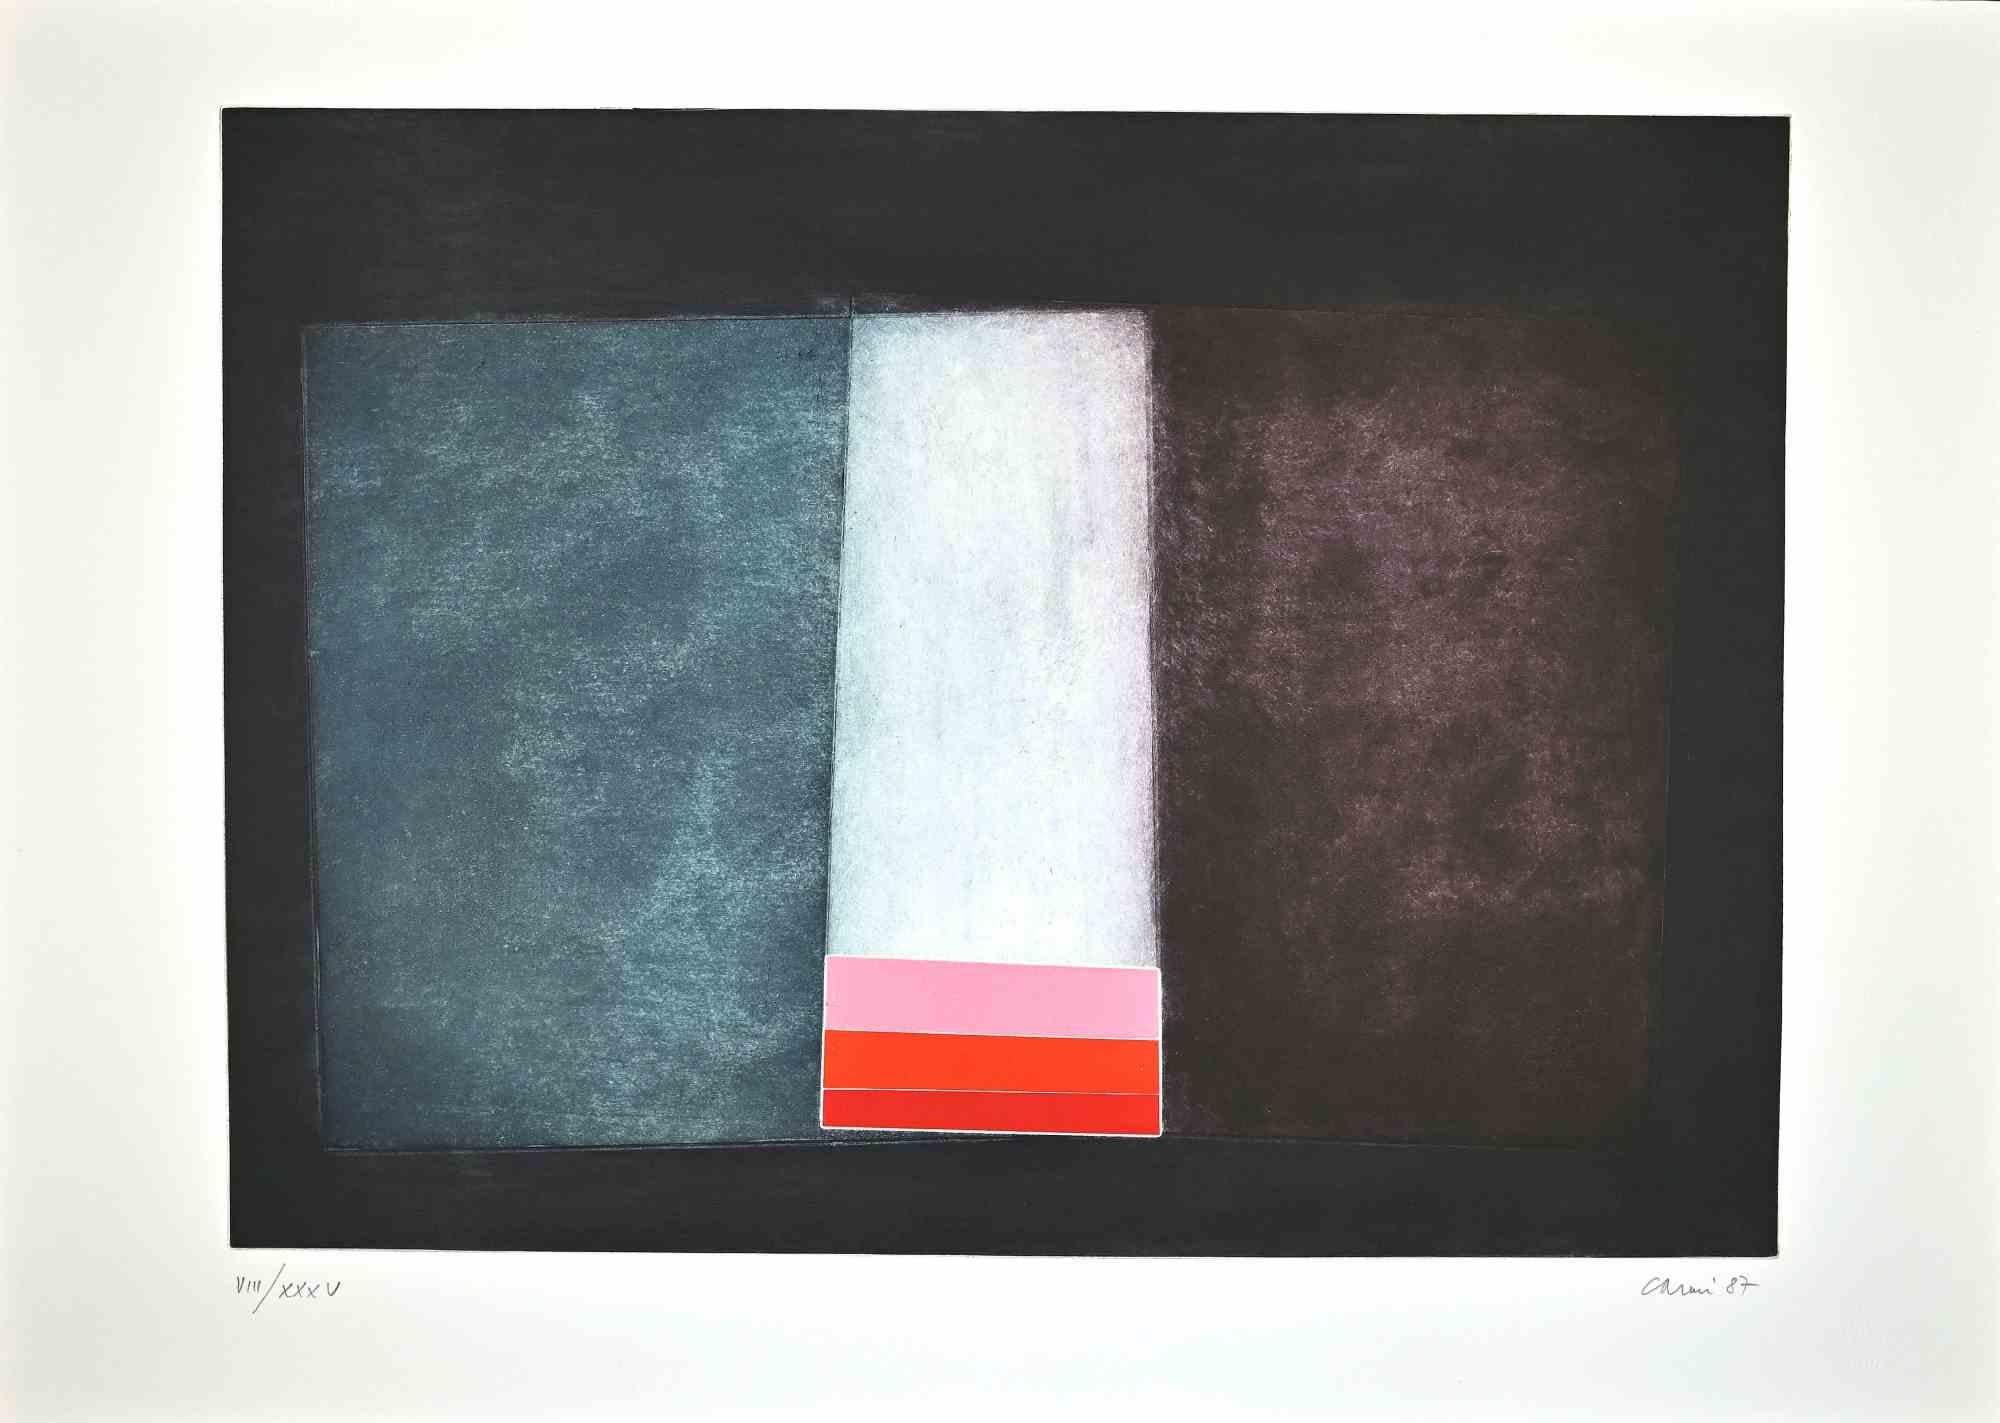 Abstract Composition - Etching by Eugenio Carmi - 1987